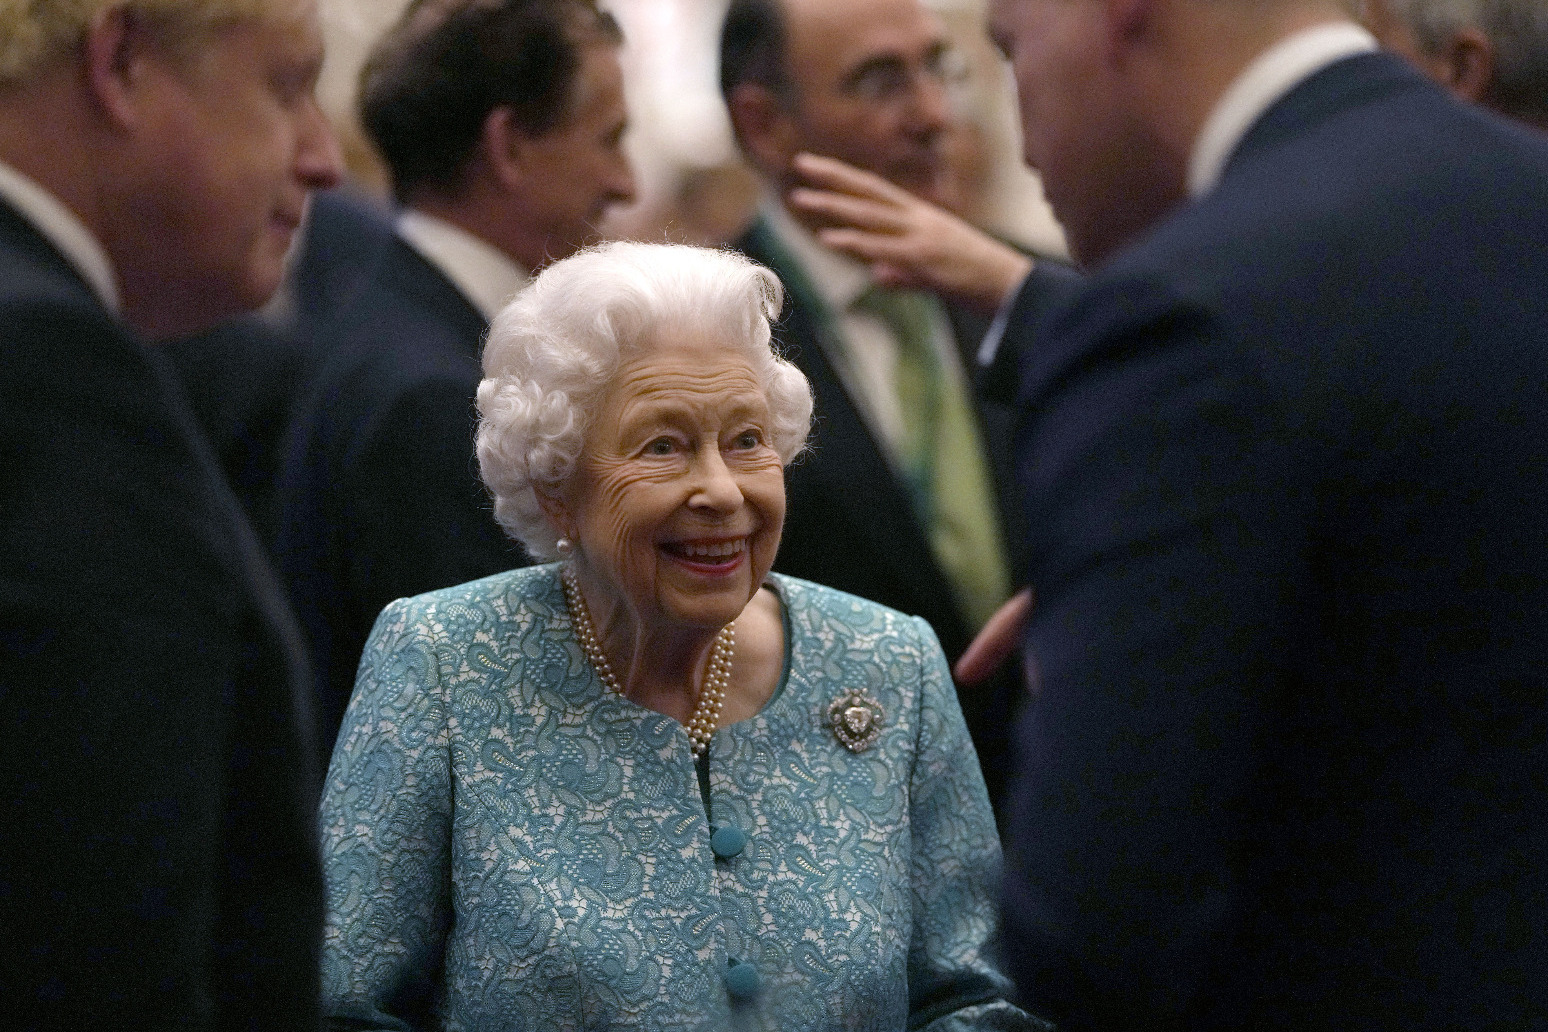 The Queen has cancelled a trip to Northern Ireland 